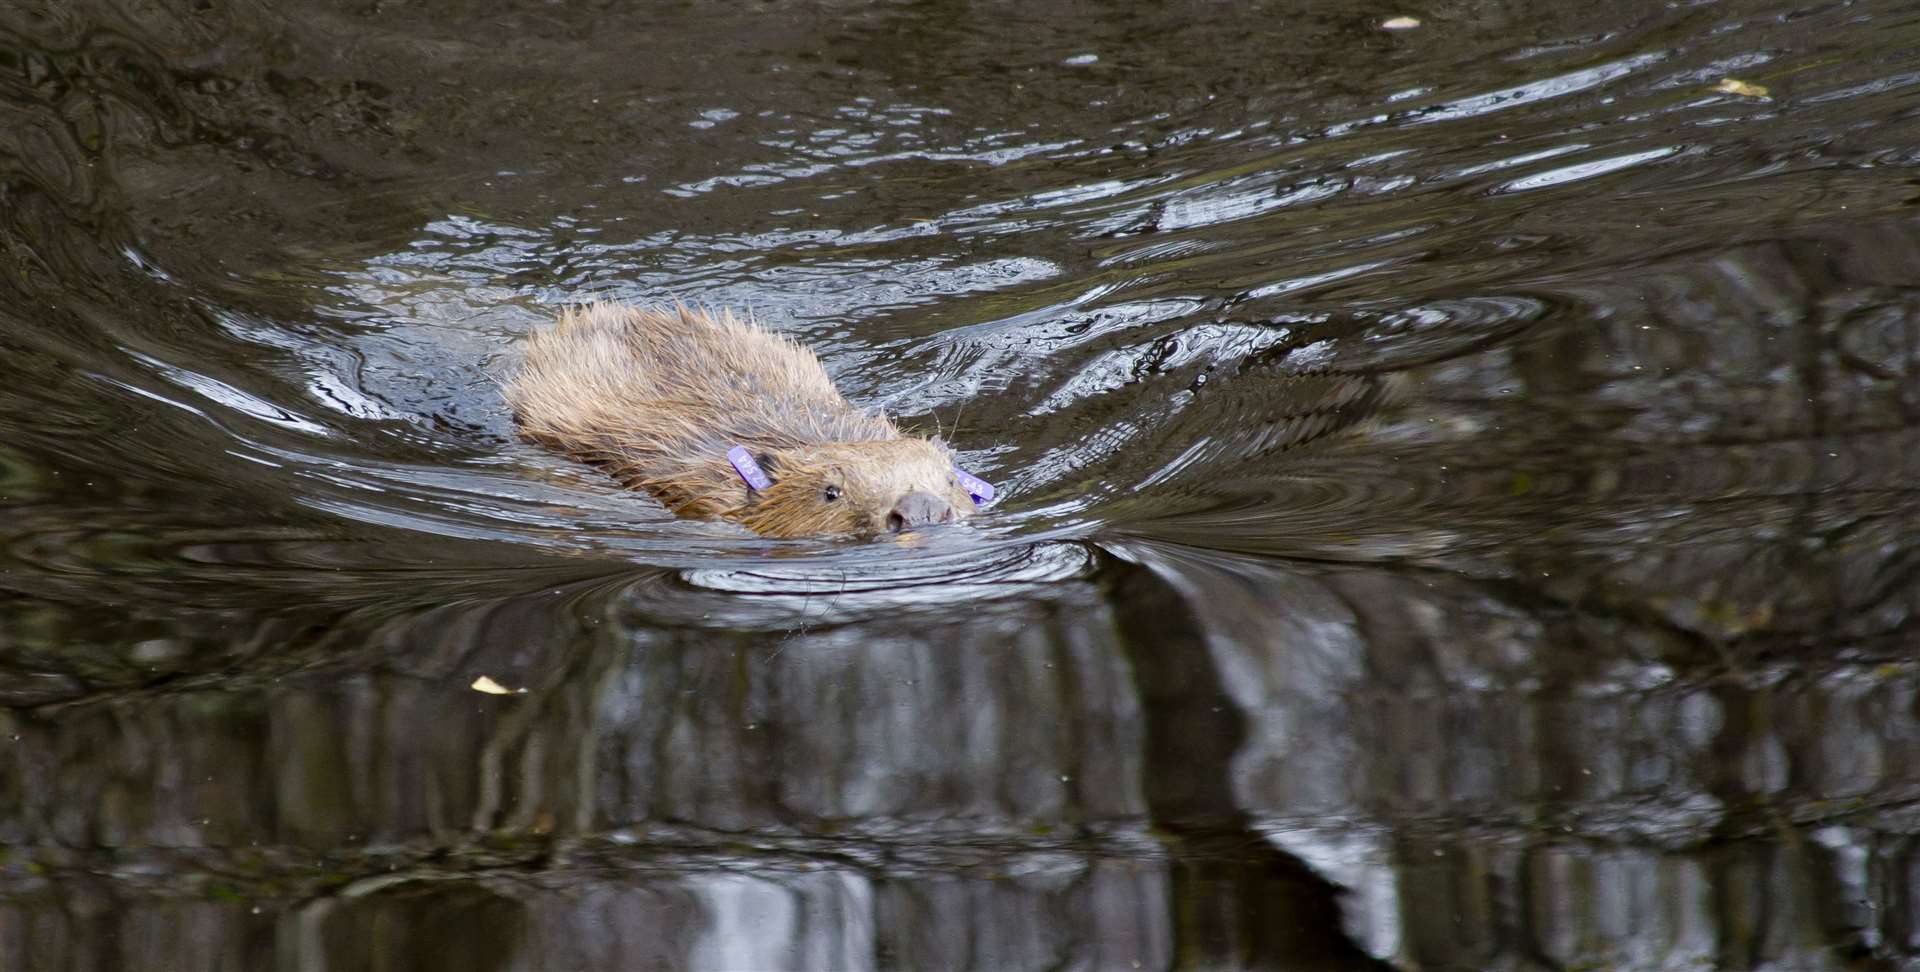 Beavers bring a number of benefits and need more protection their supporters say.